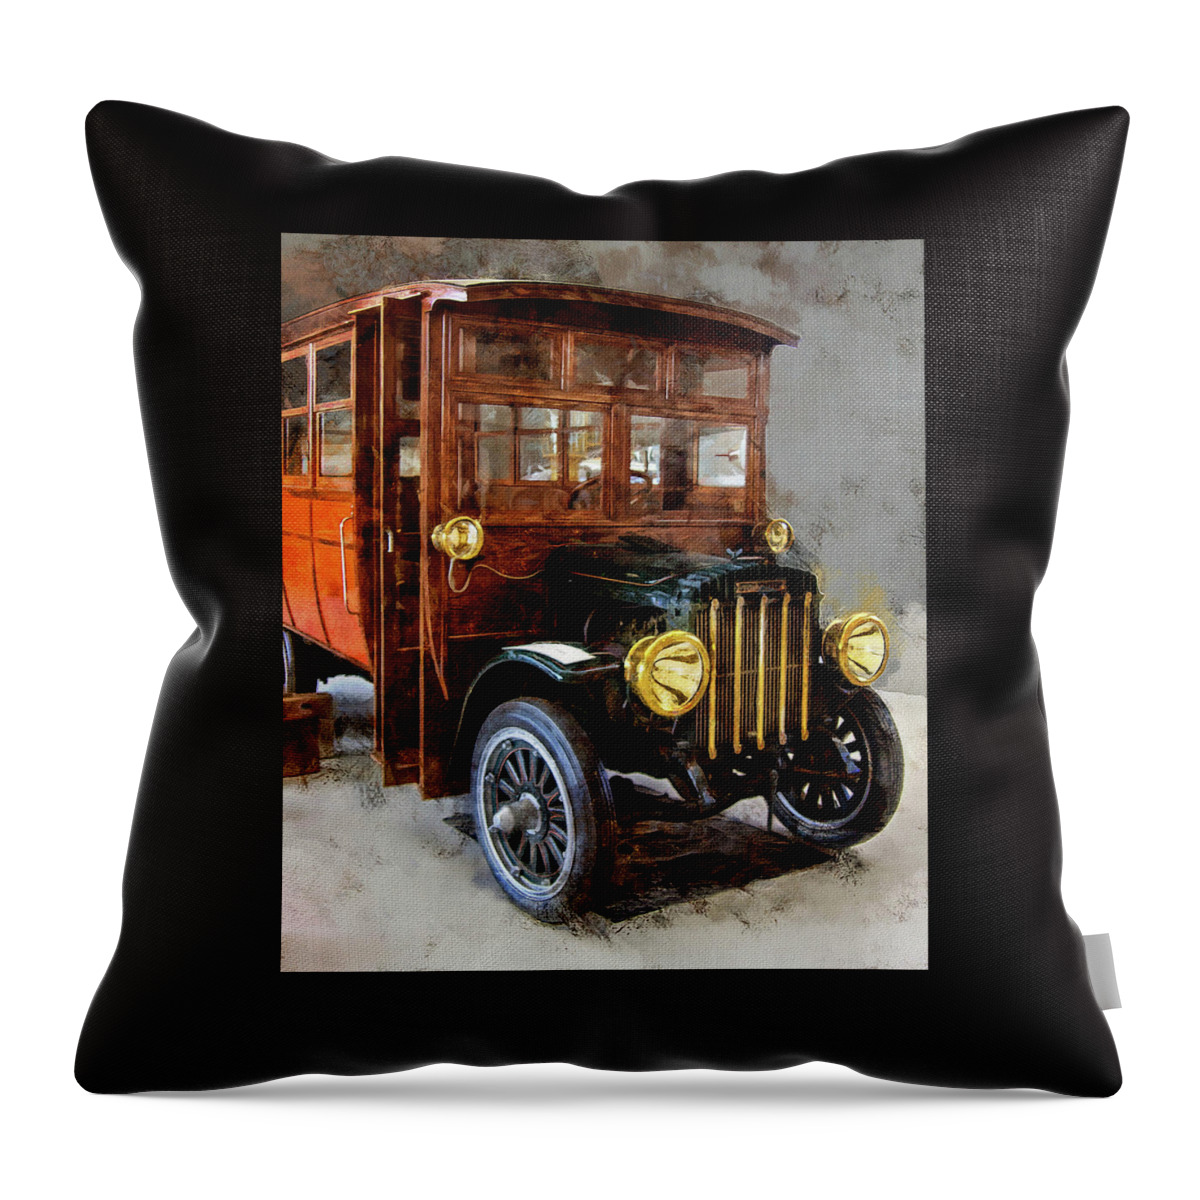 Stoughton Bus Throw Pillow featuring the photograph Thee Old Stoughton Bus by Thom Zehrfeld